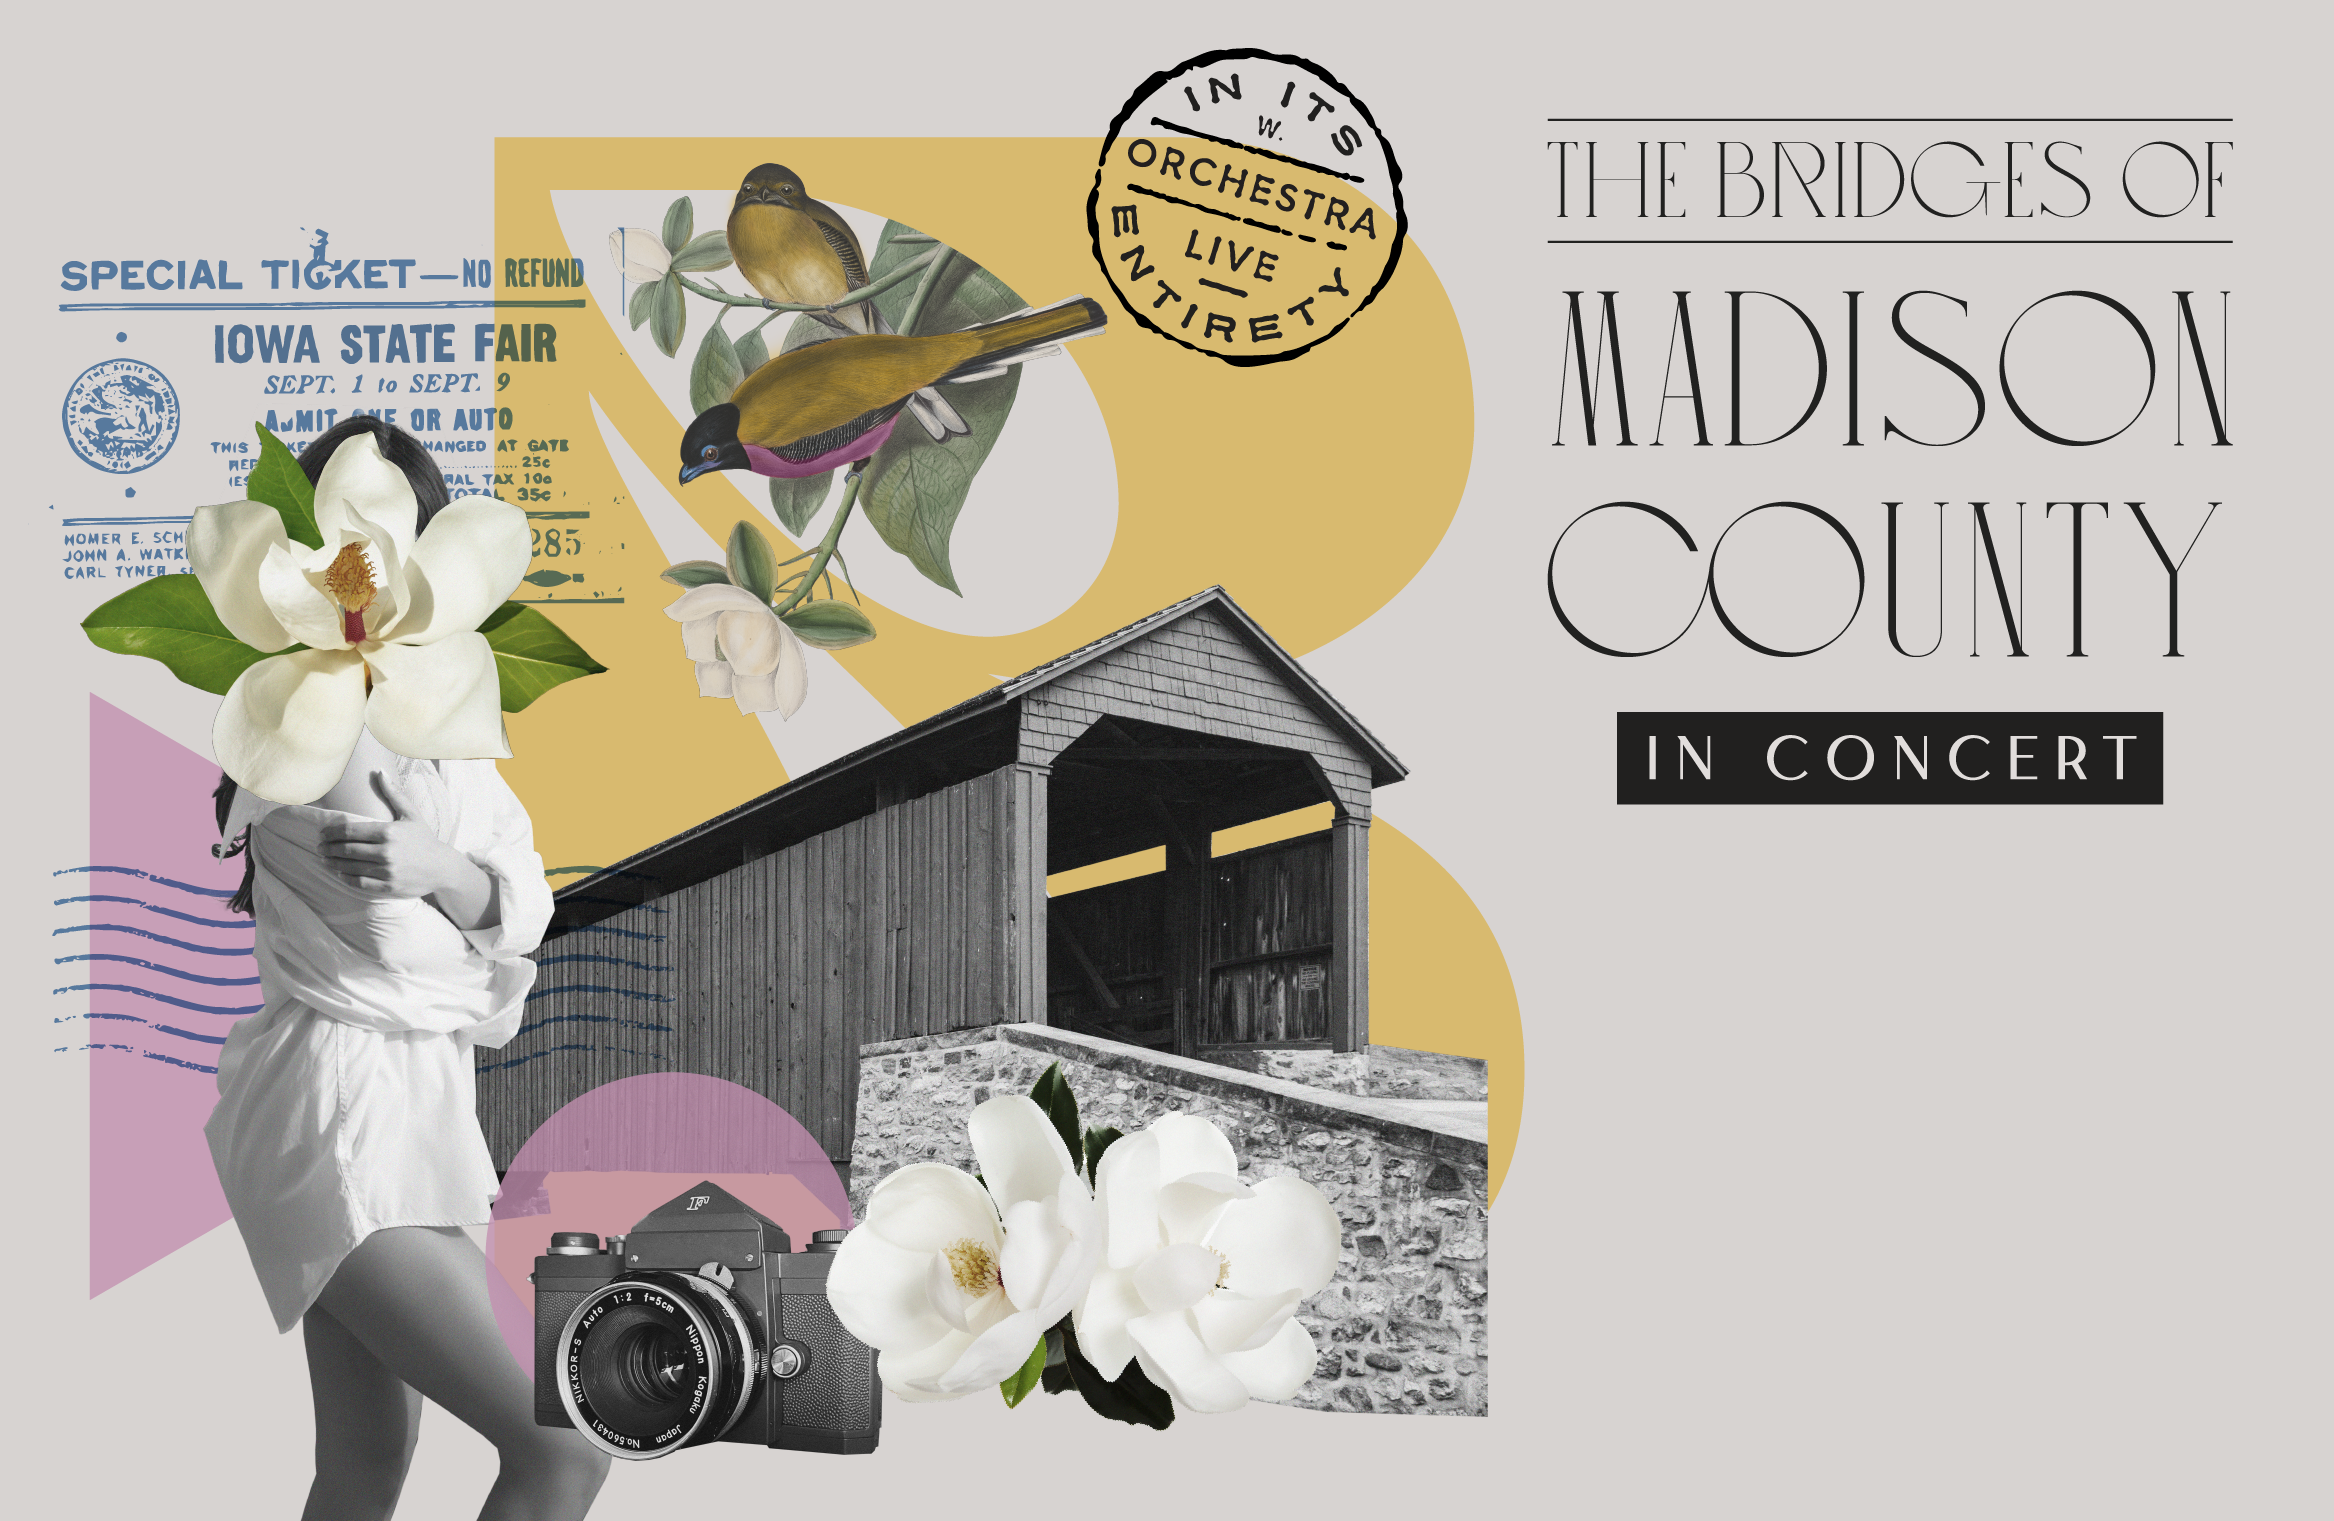 The Bridges of Madison County: In Concert